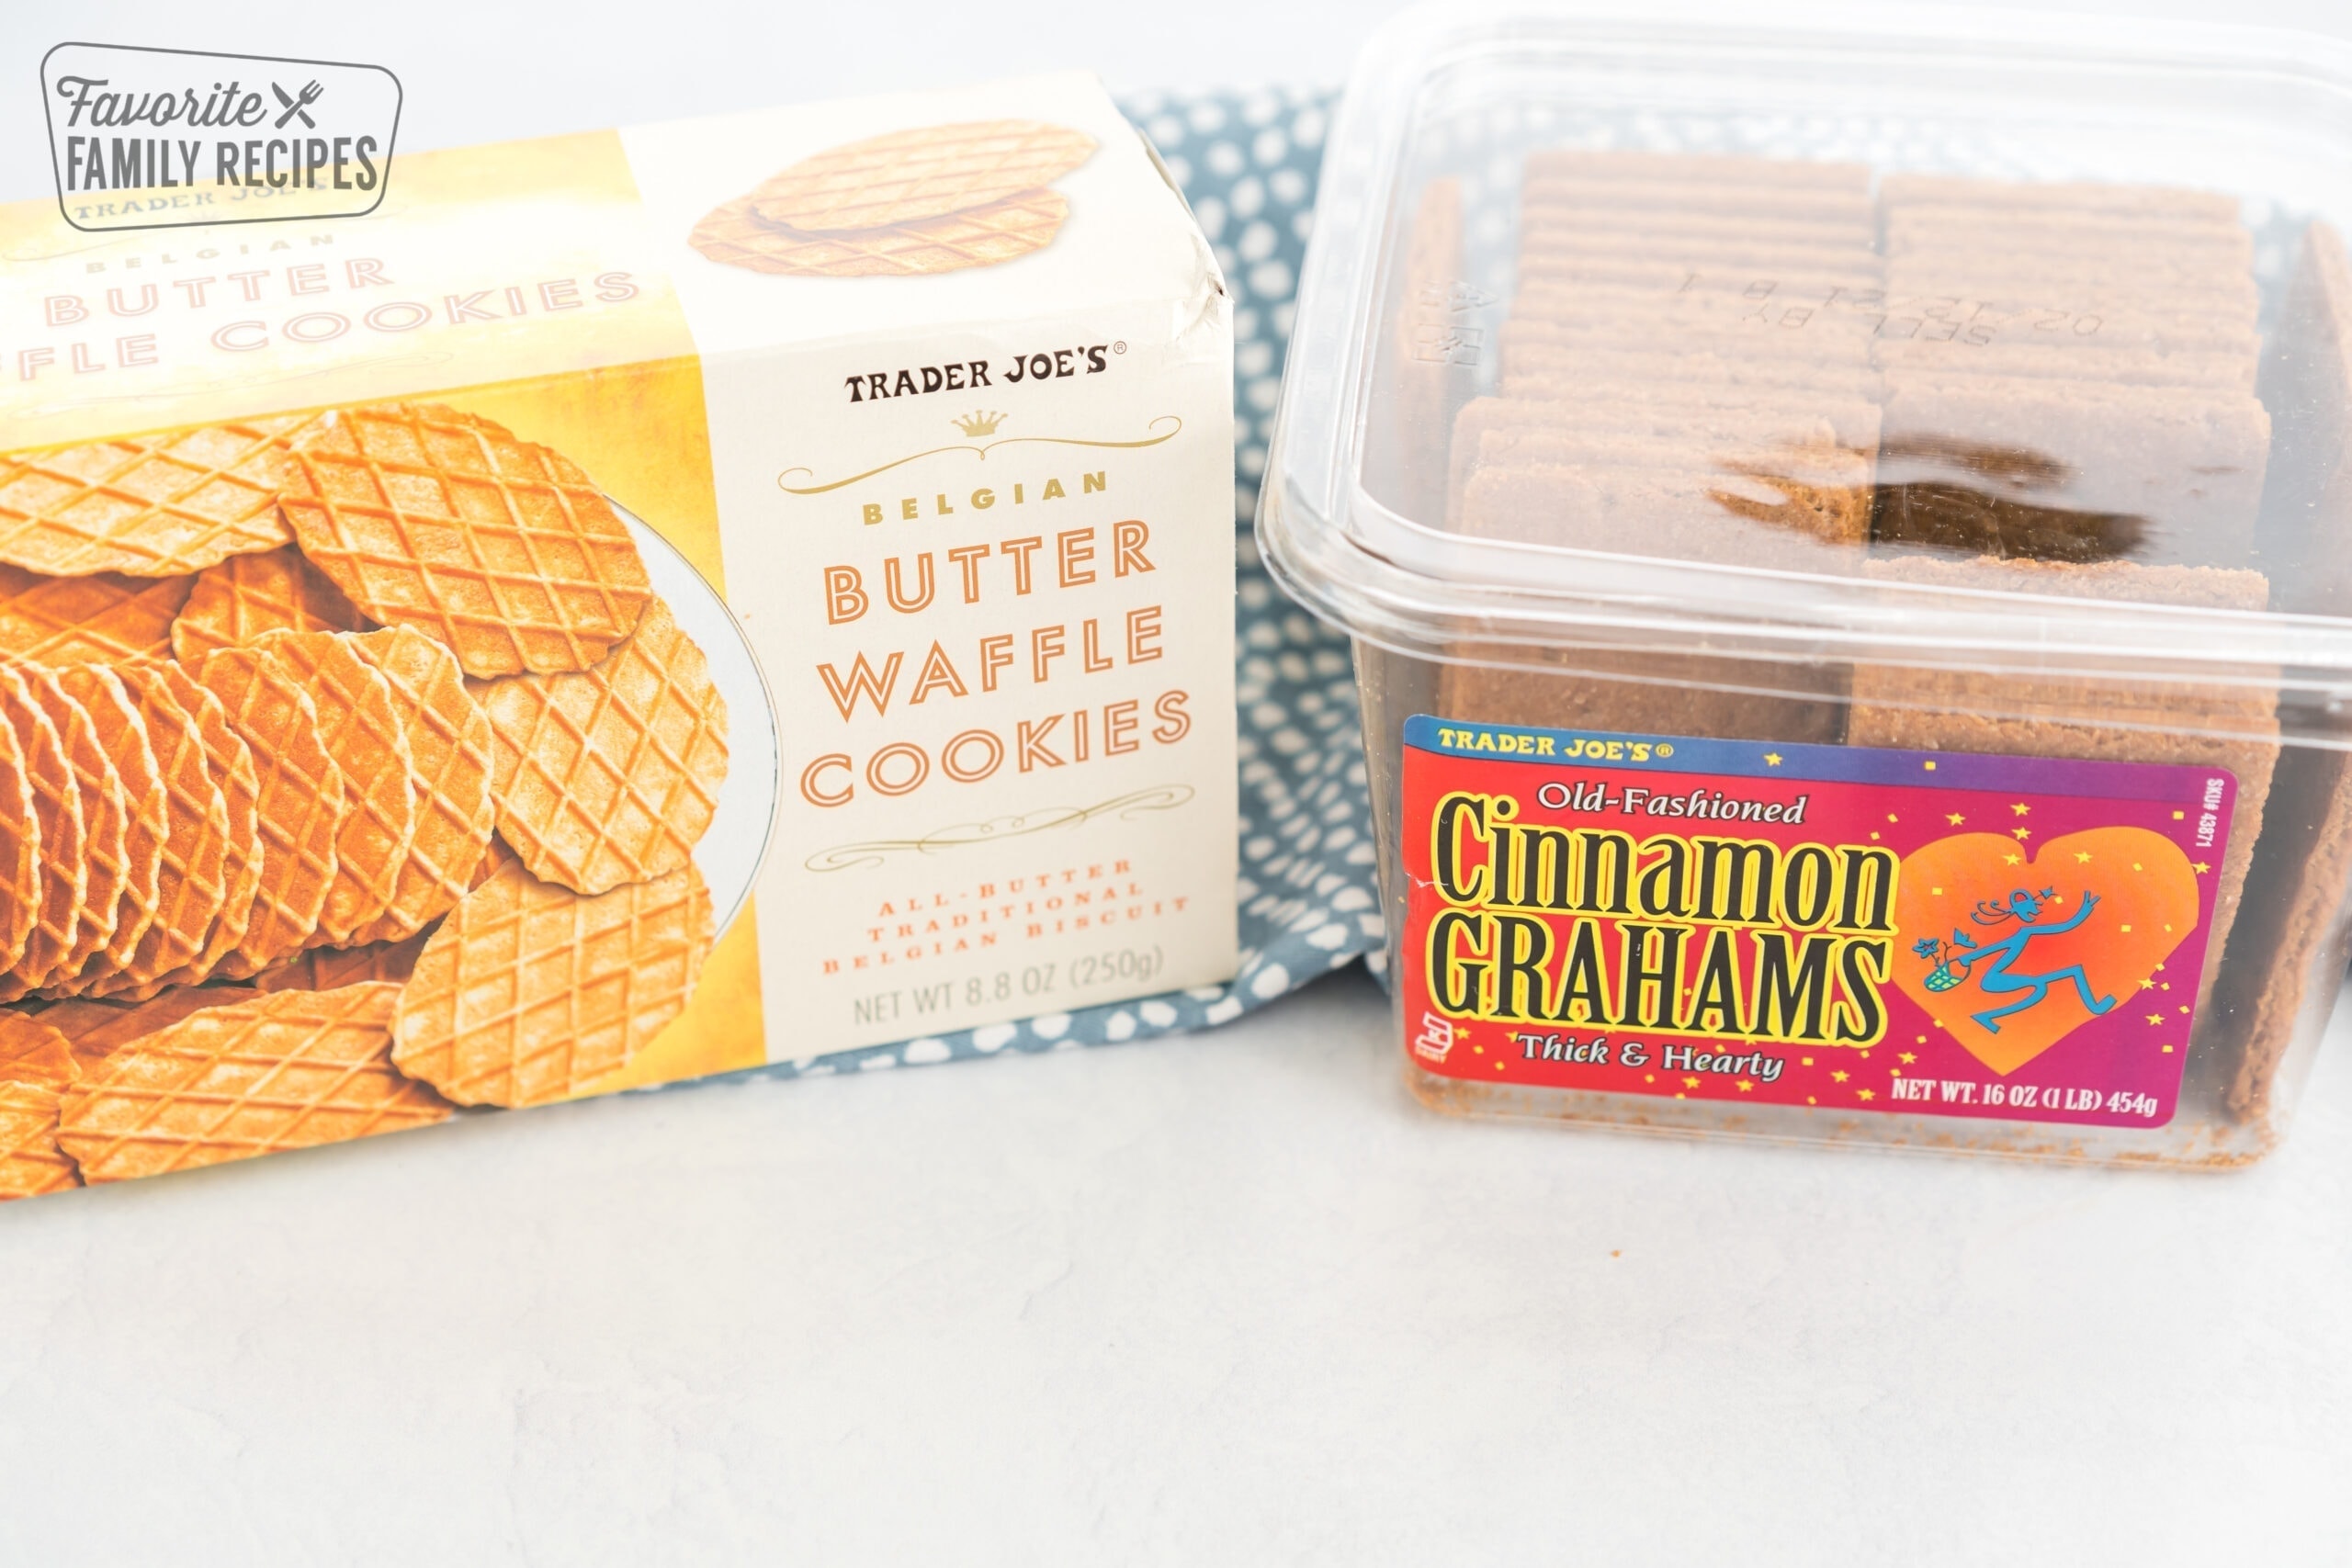 Butter Waffle Cookies and Cinnamon Grahams from Trader Joe's to serve with pumpkin dip